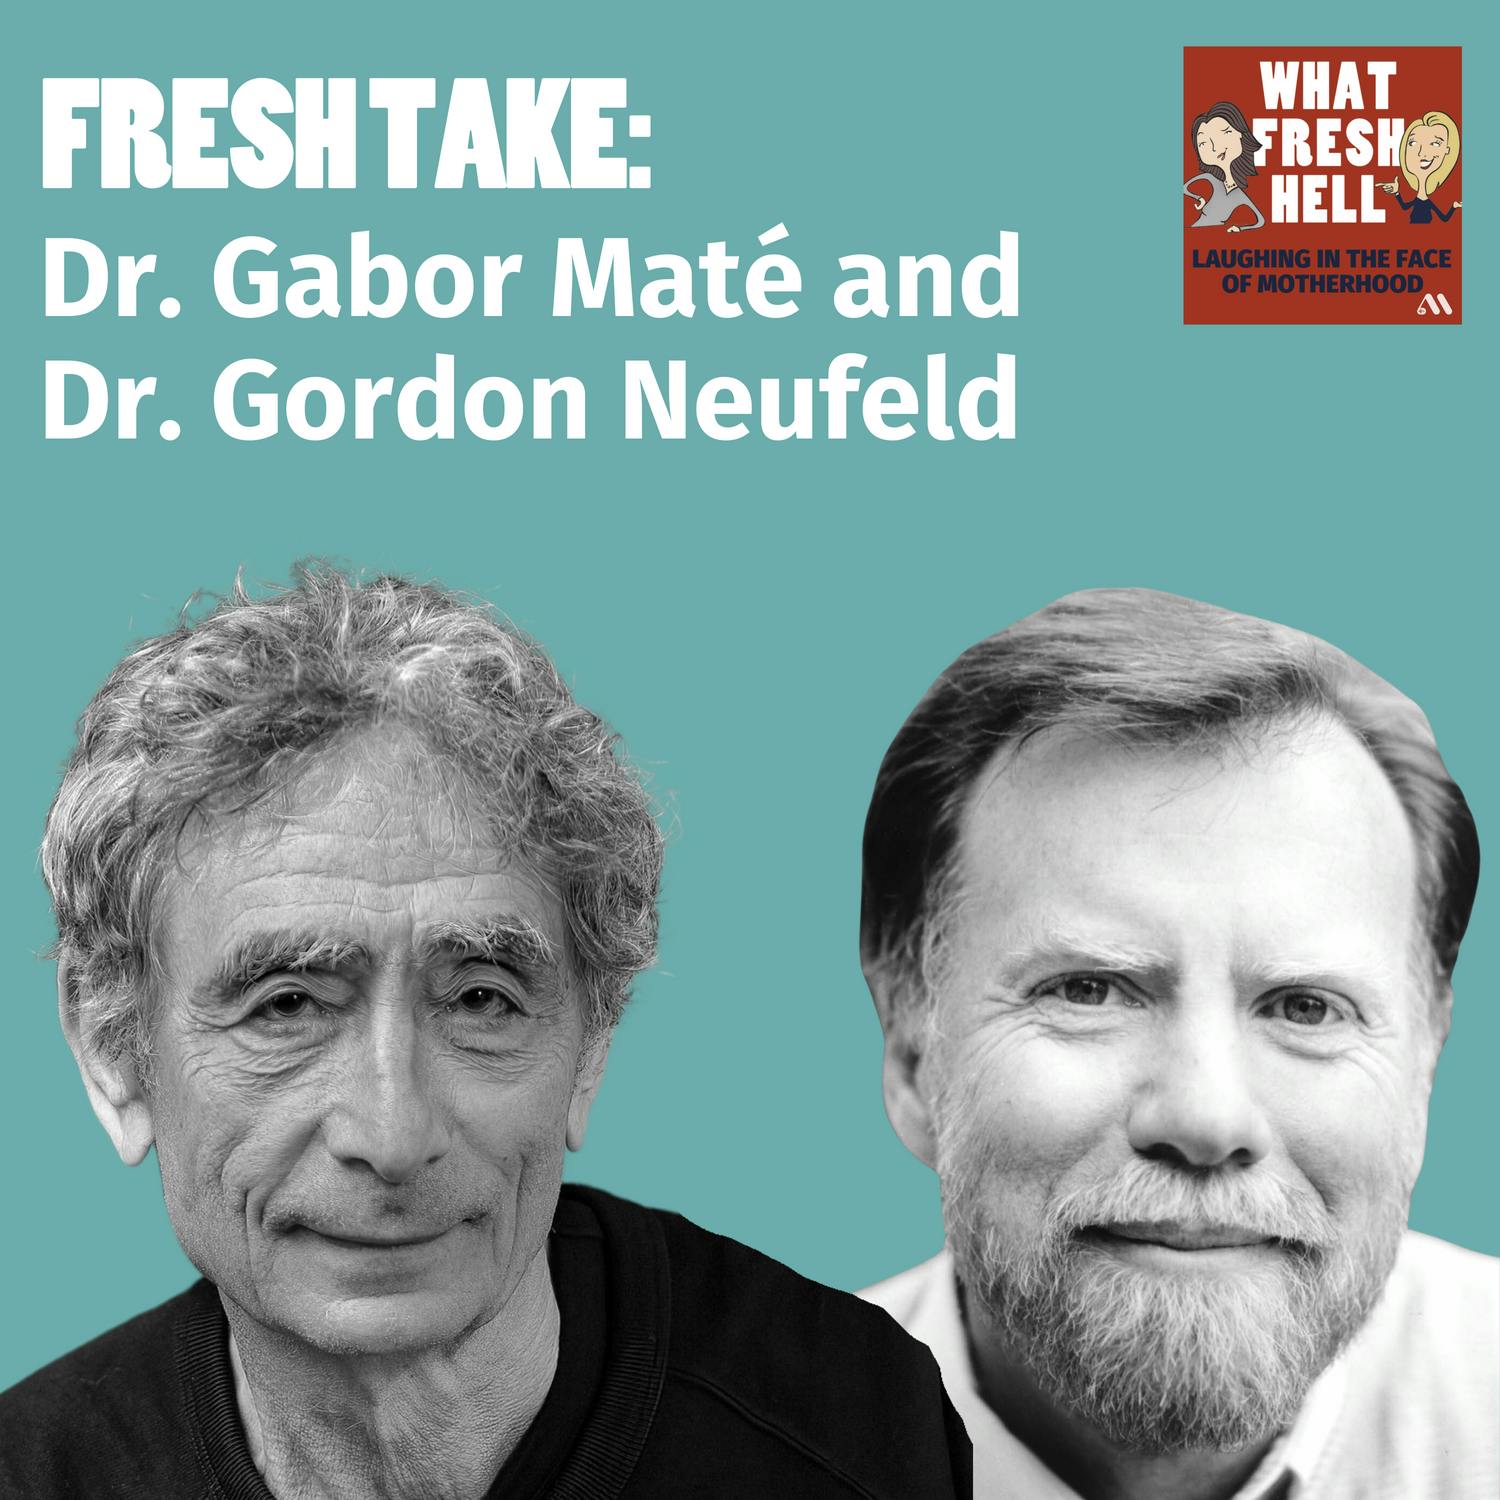 Fresh Take: Dr. Gabor Maté and Dr. Gordon Neufeld on Maintaining Healthy Connection with Our Kids